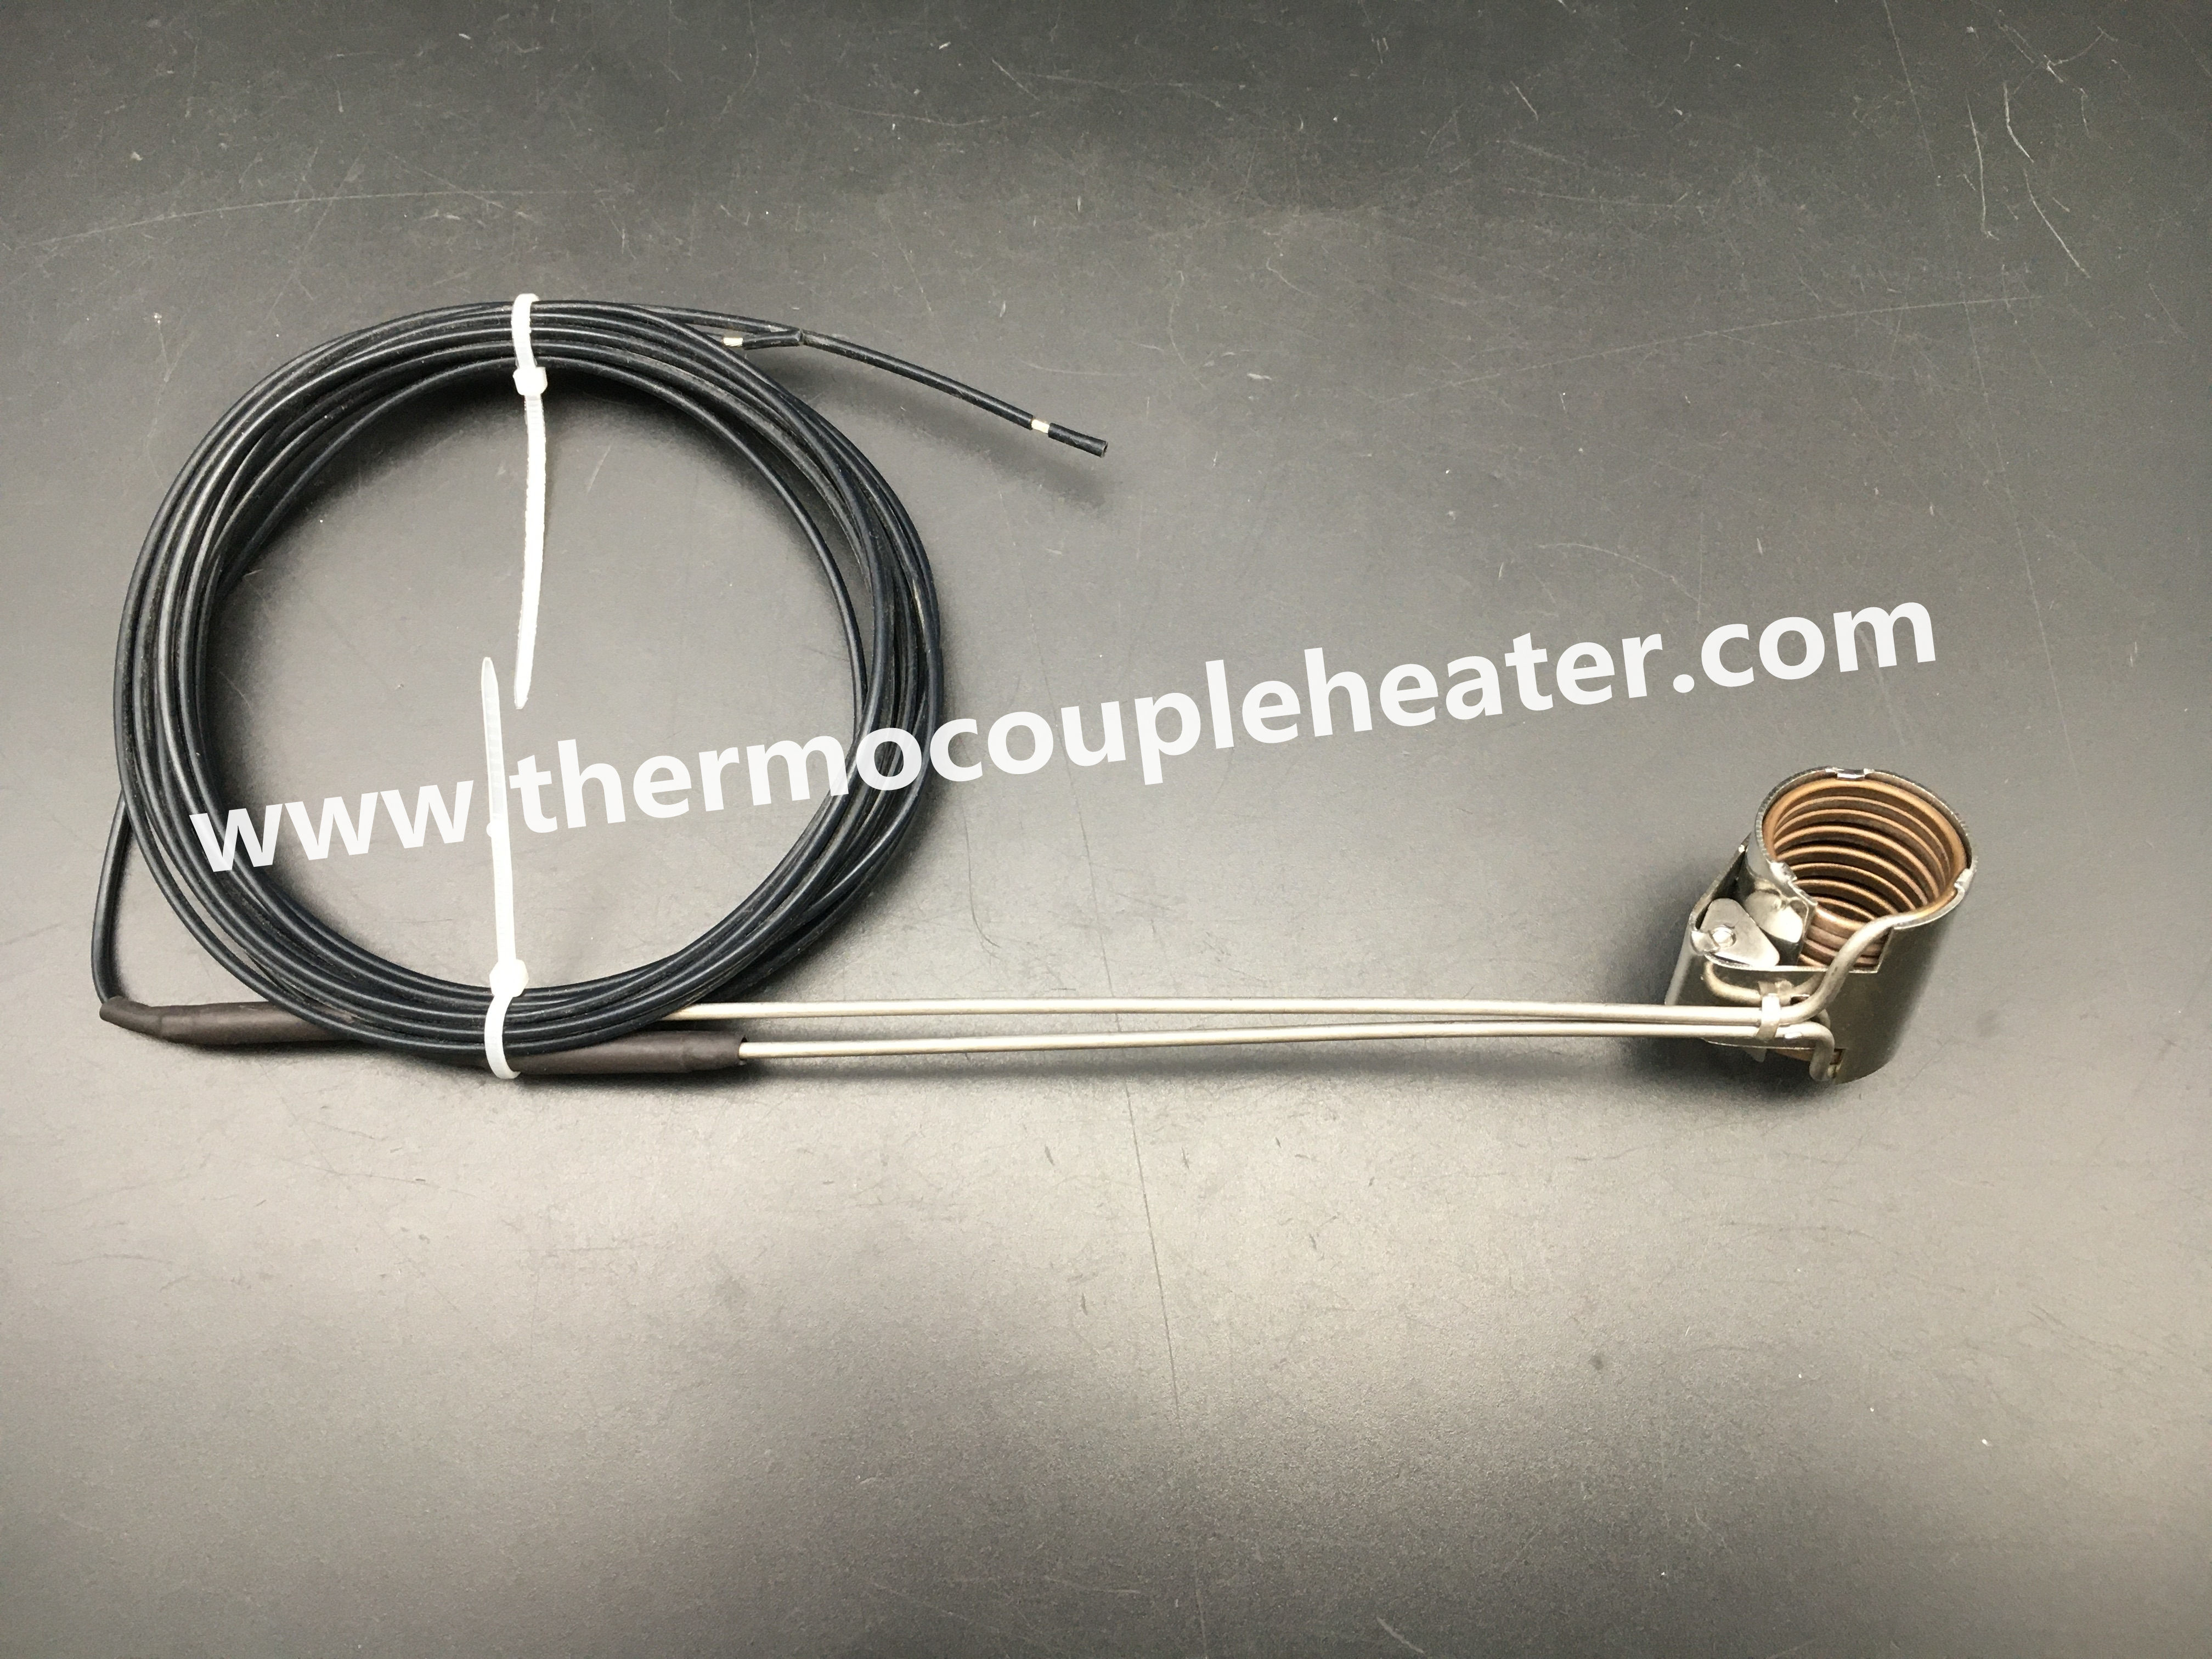 Top Axial Clamp Mini / Micro Coil Heater For Injection Molding Nozzle Heating